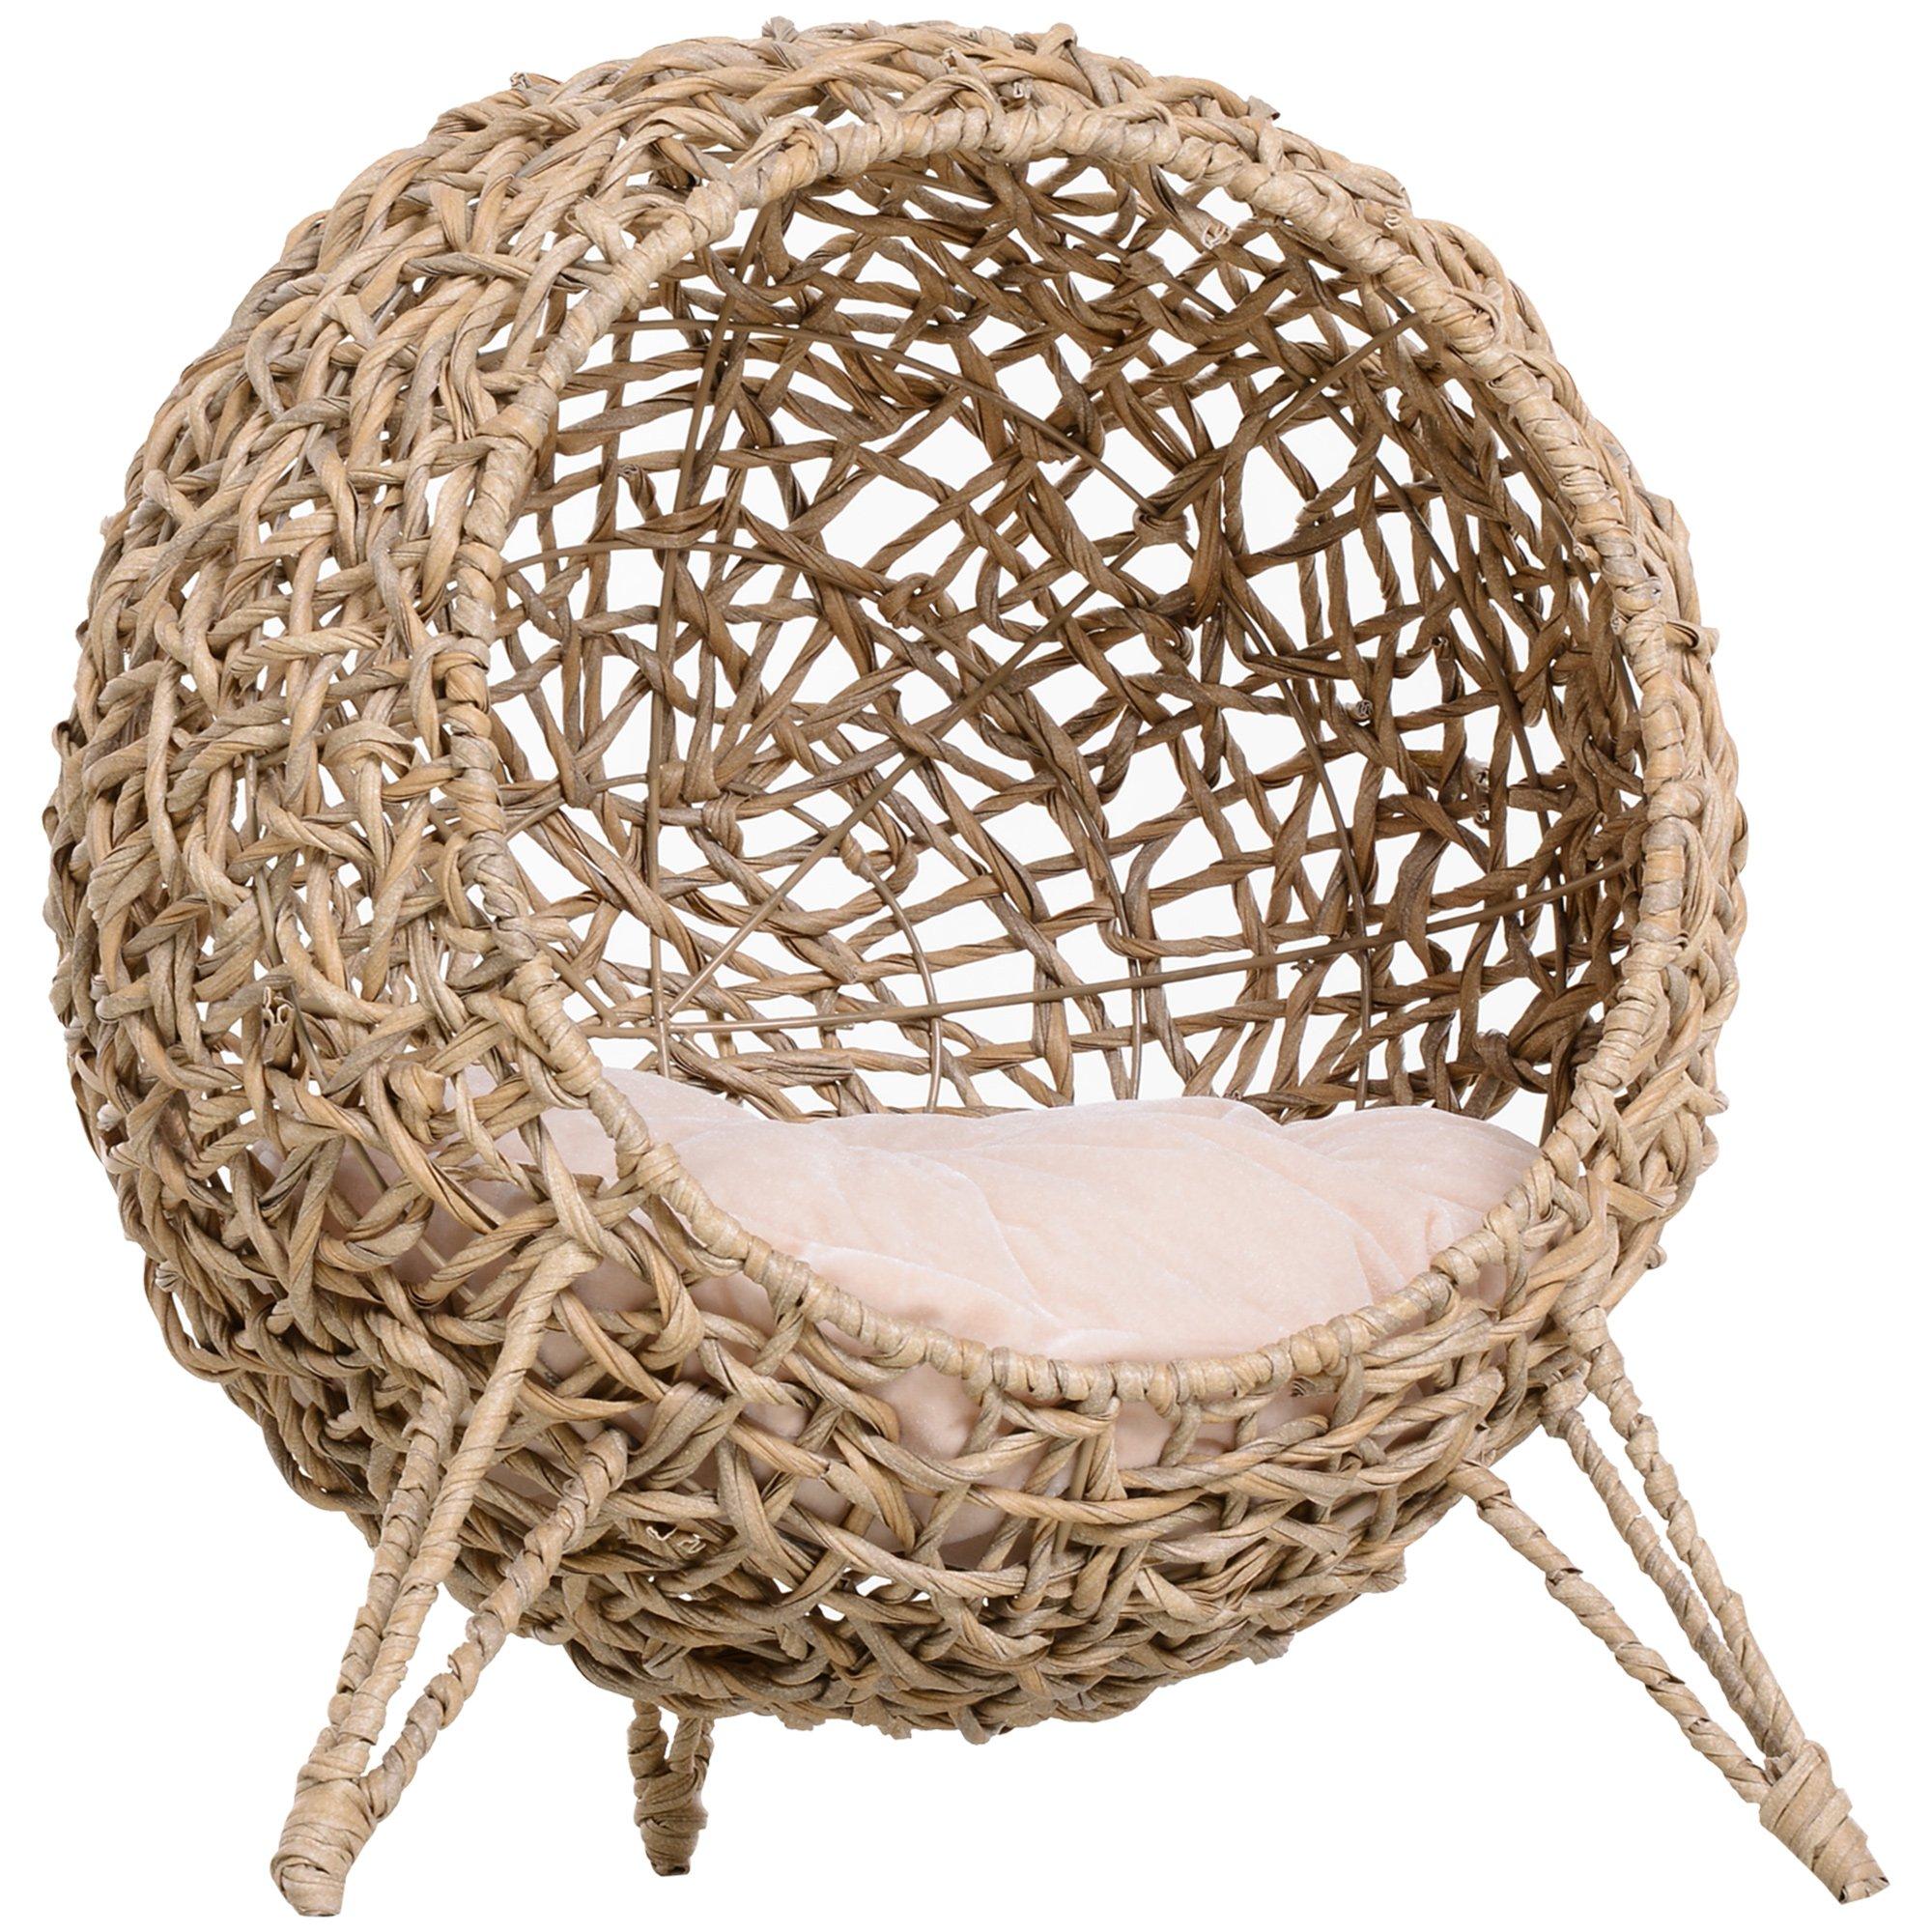 Wicker Cat House, Rattan Elevated Cat Bed with Cushion